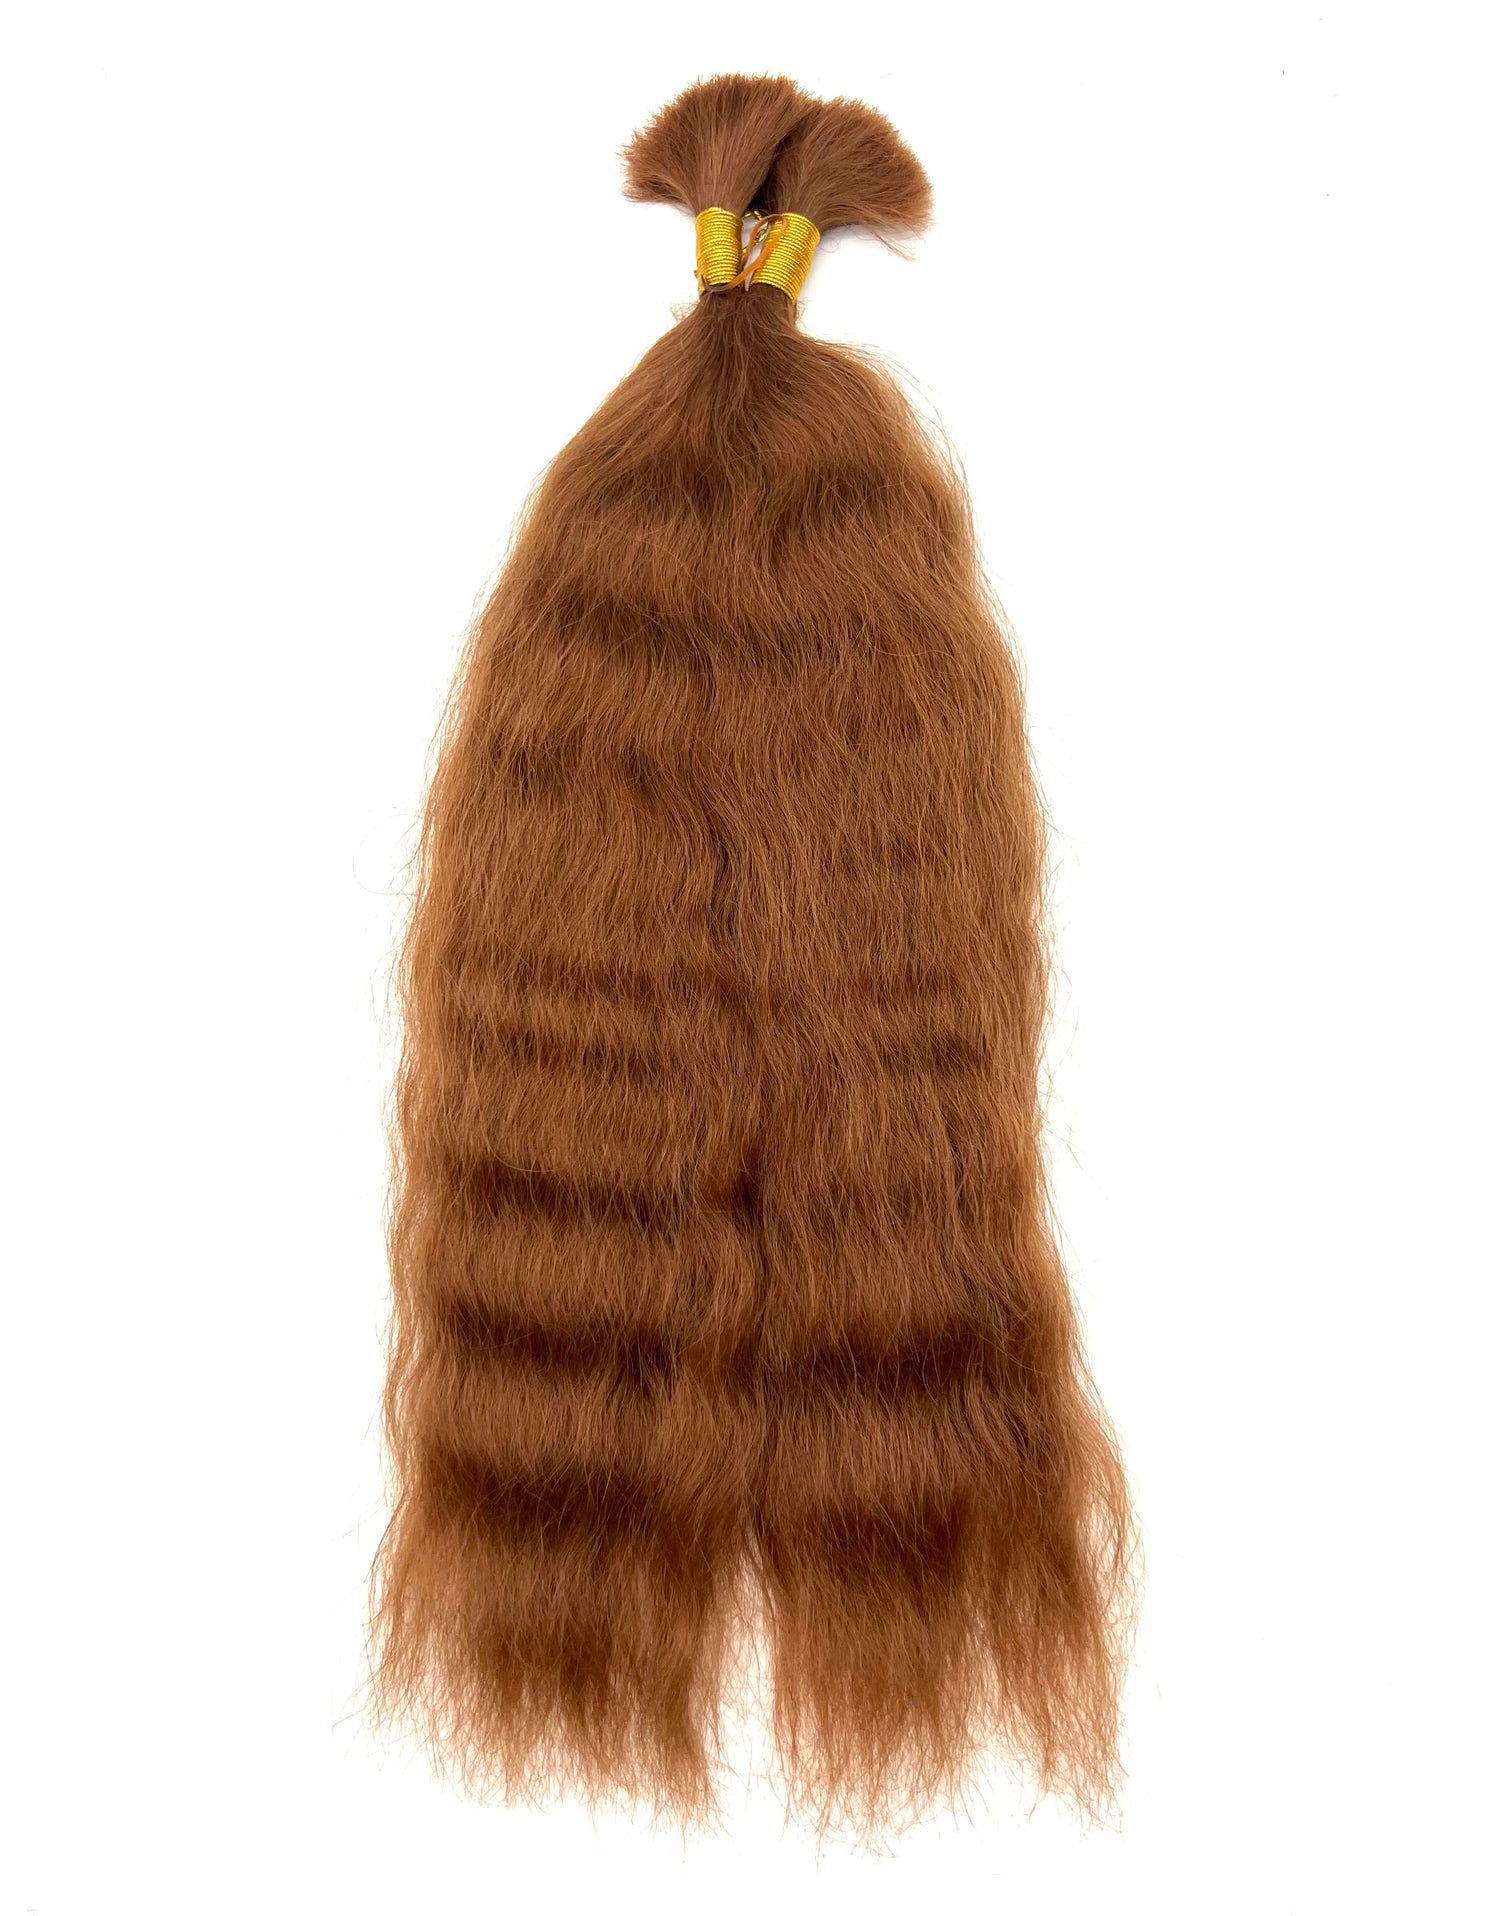 Hush Blended Human Hair Collection